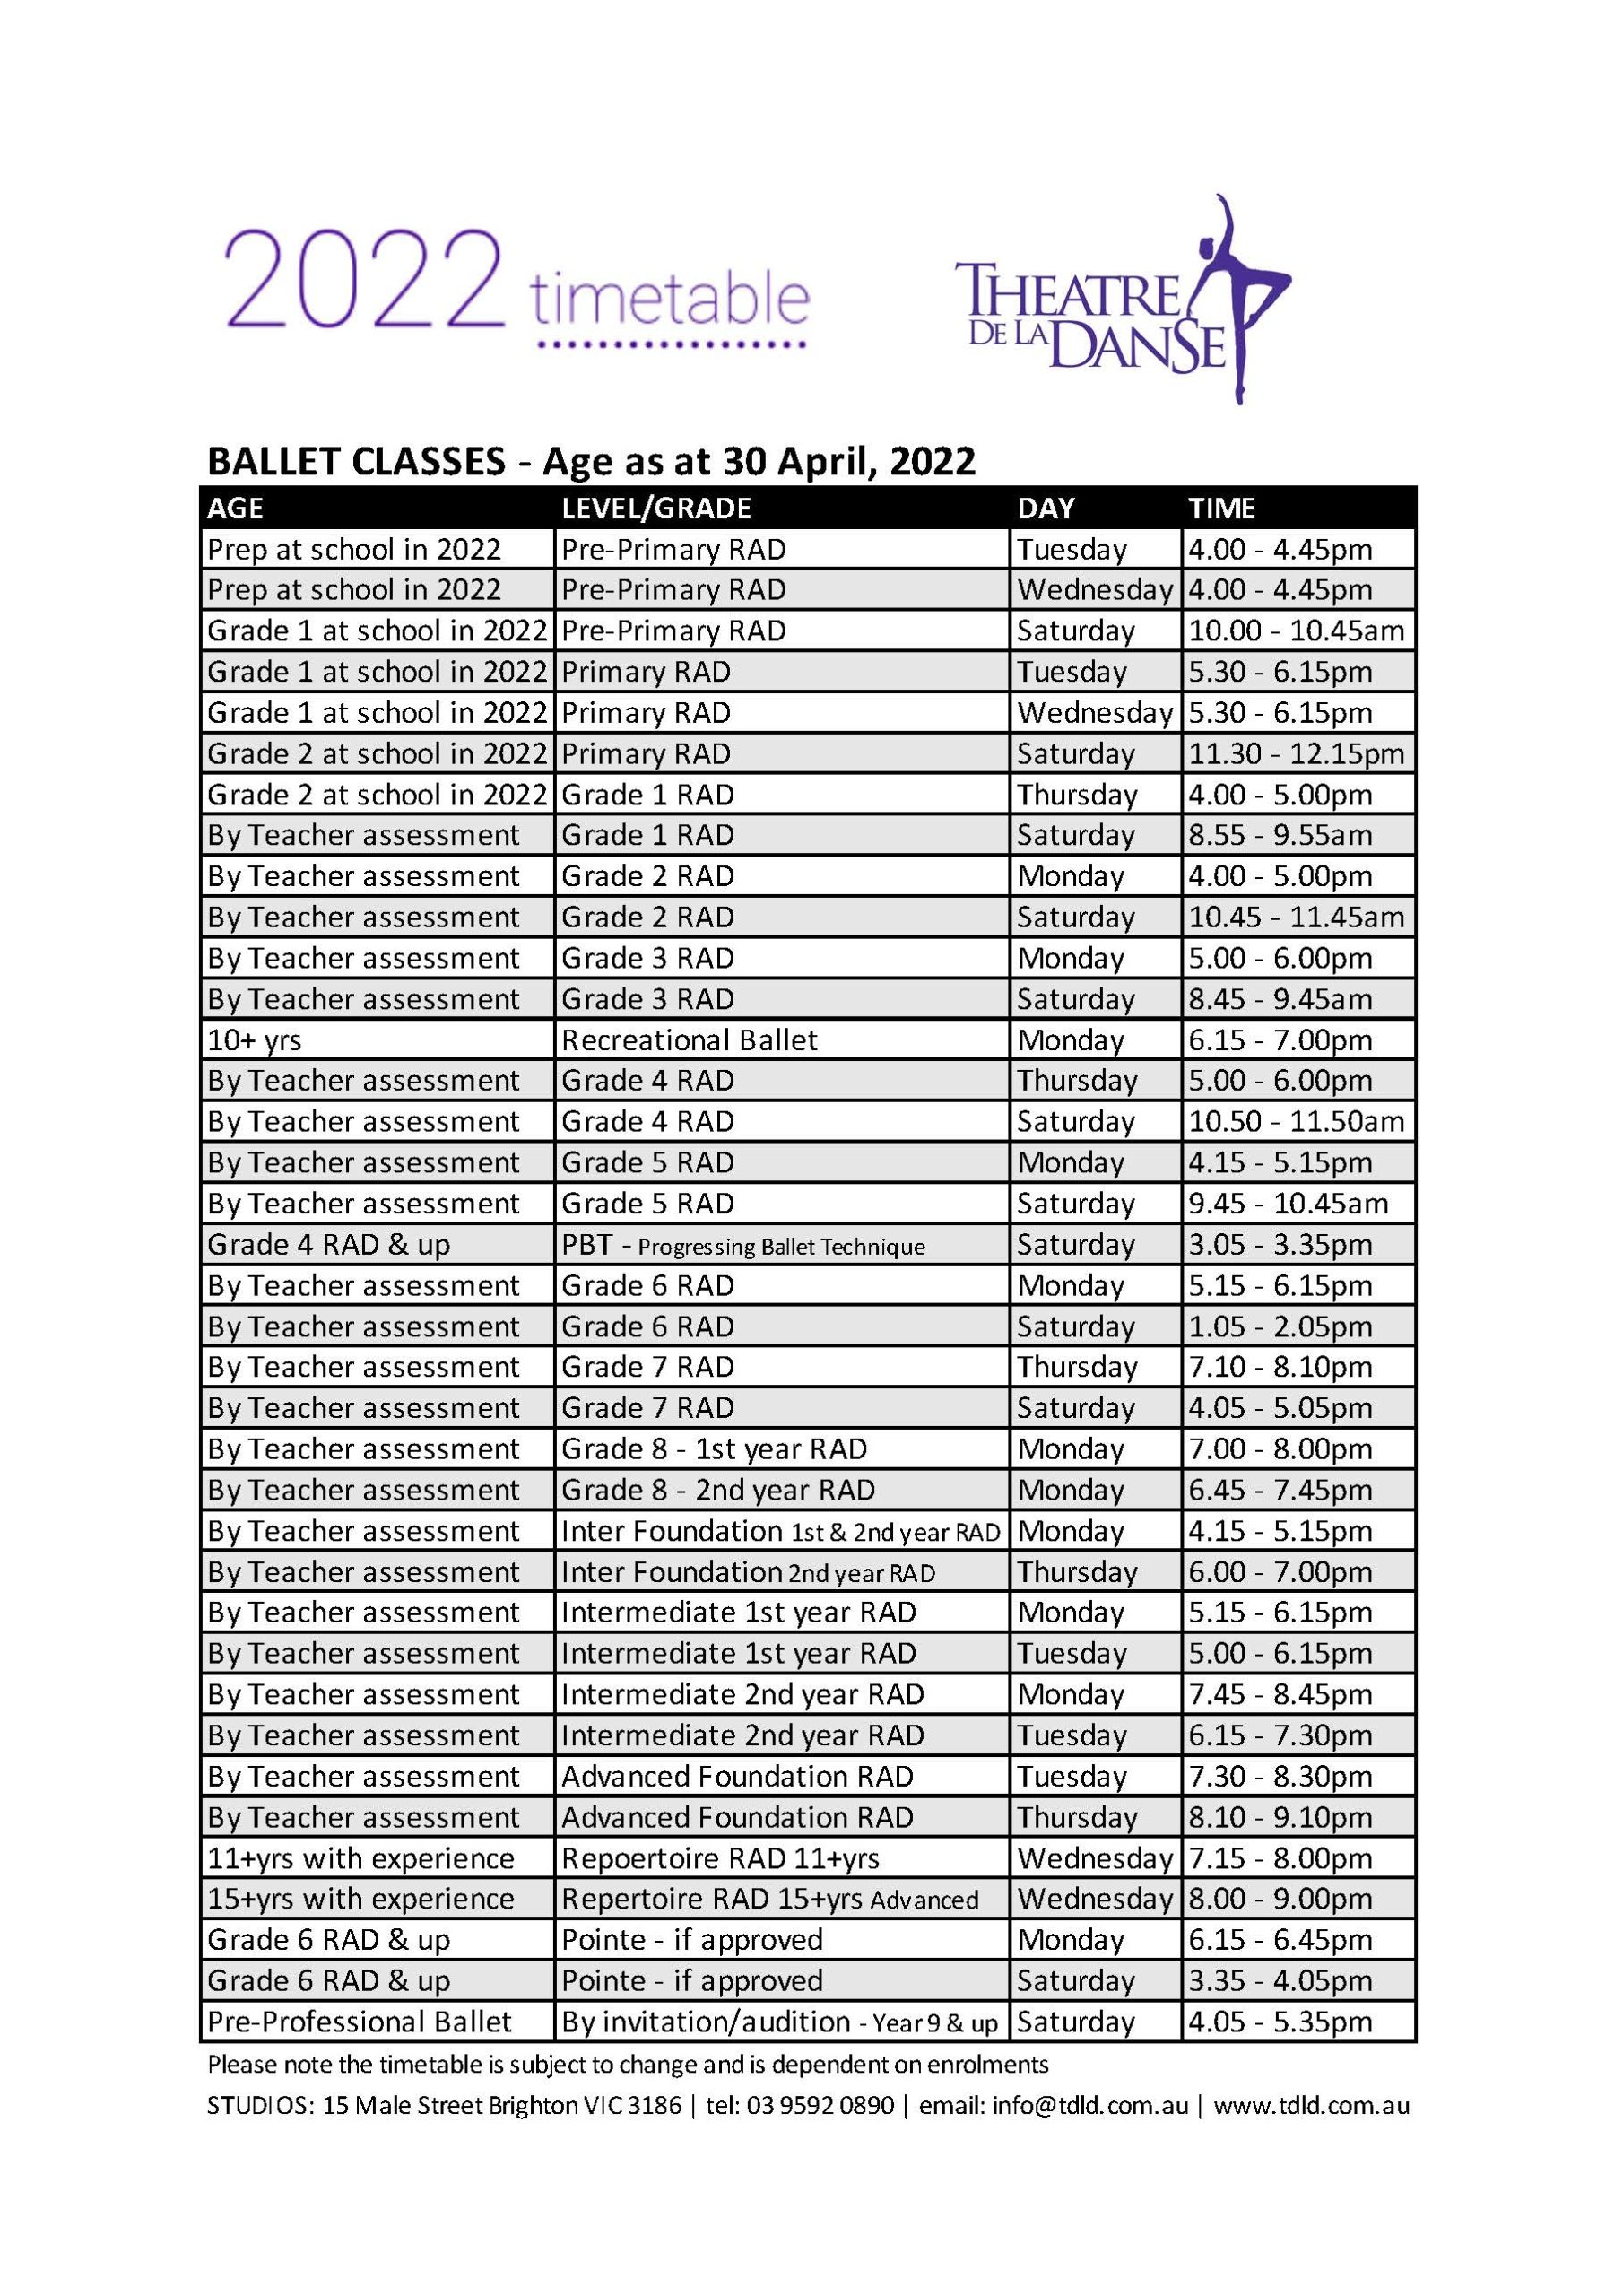 2022 Timetable - as at 8 April - Page_2